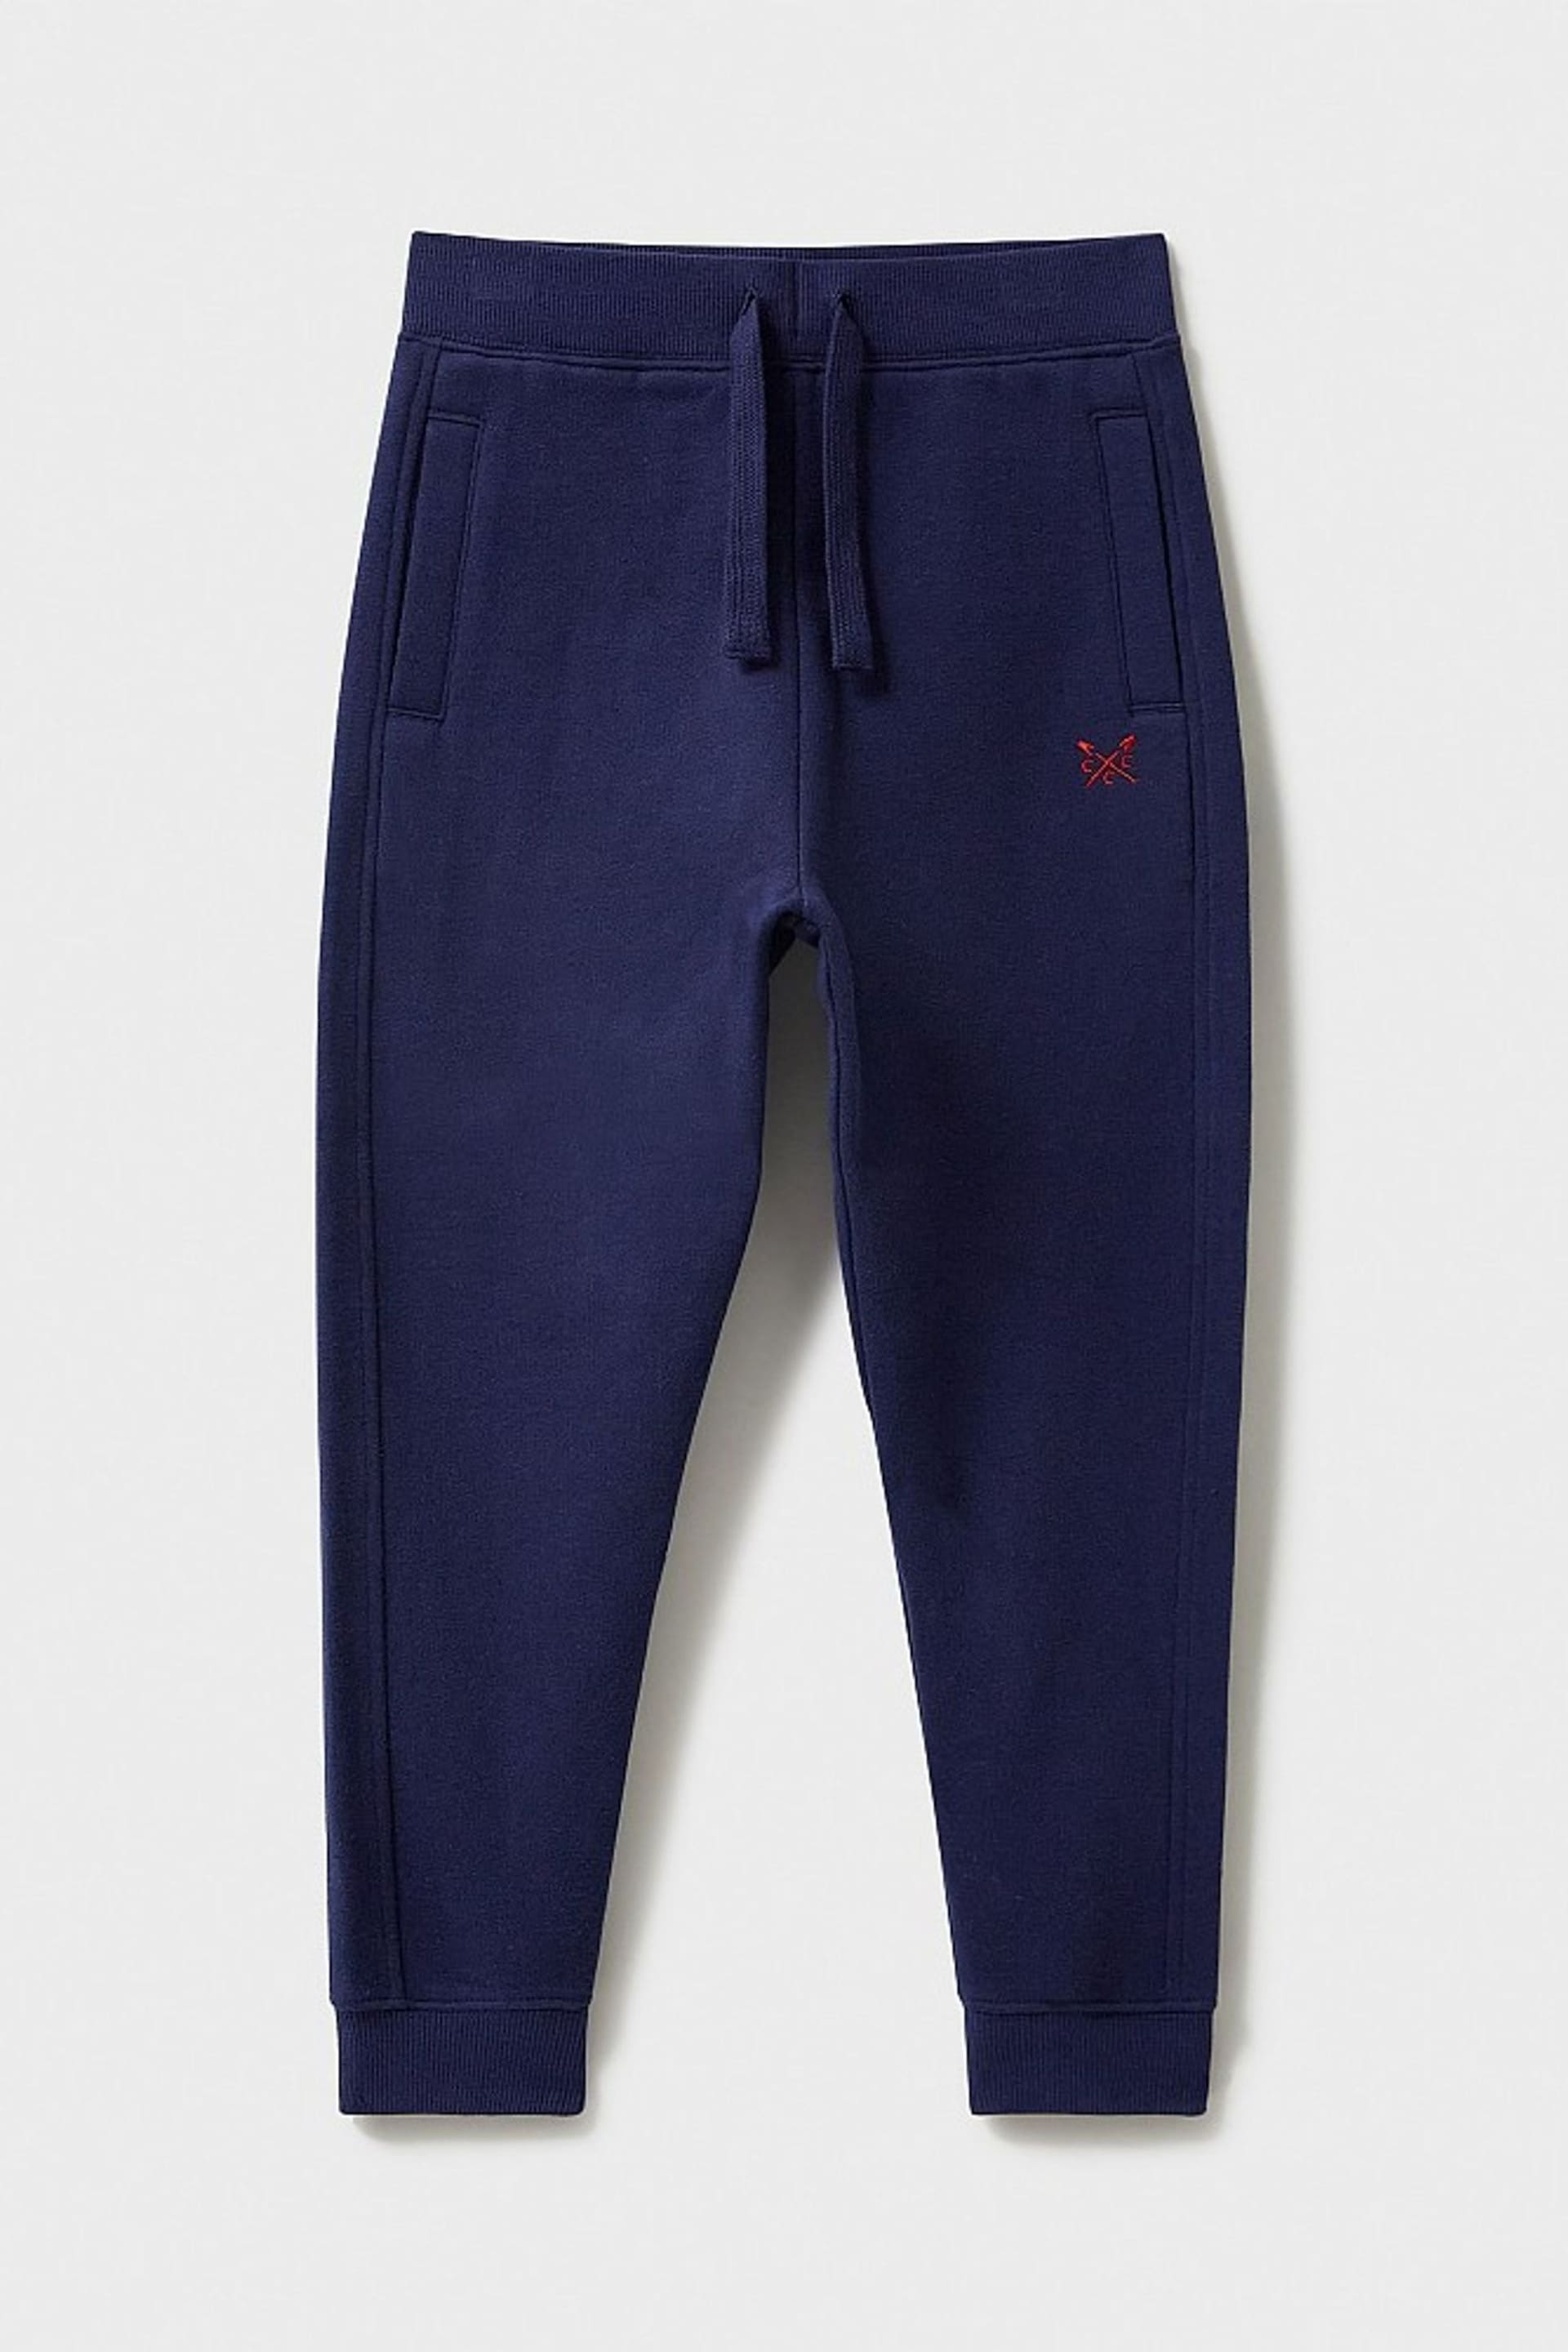 Crew Clothing Crossed Oars Joggers - Image 1 of 3